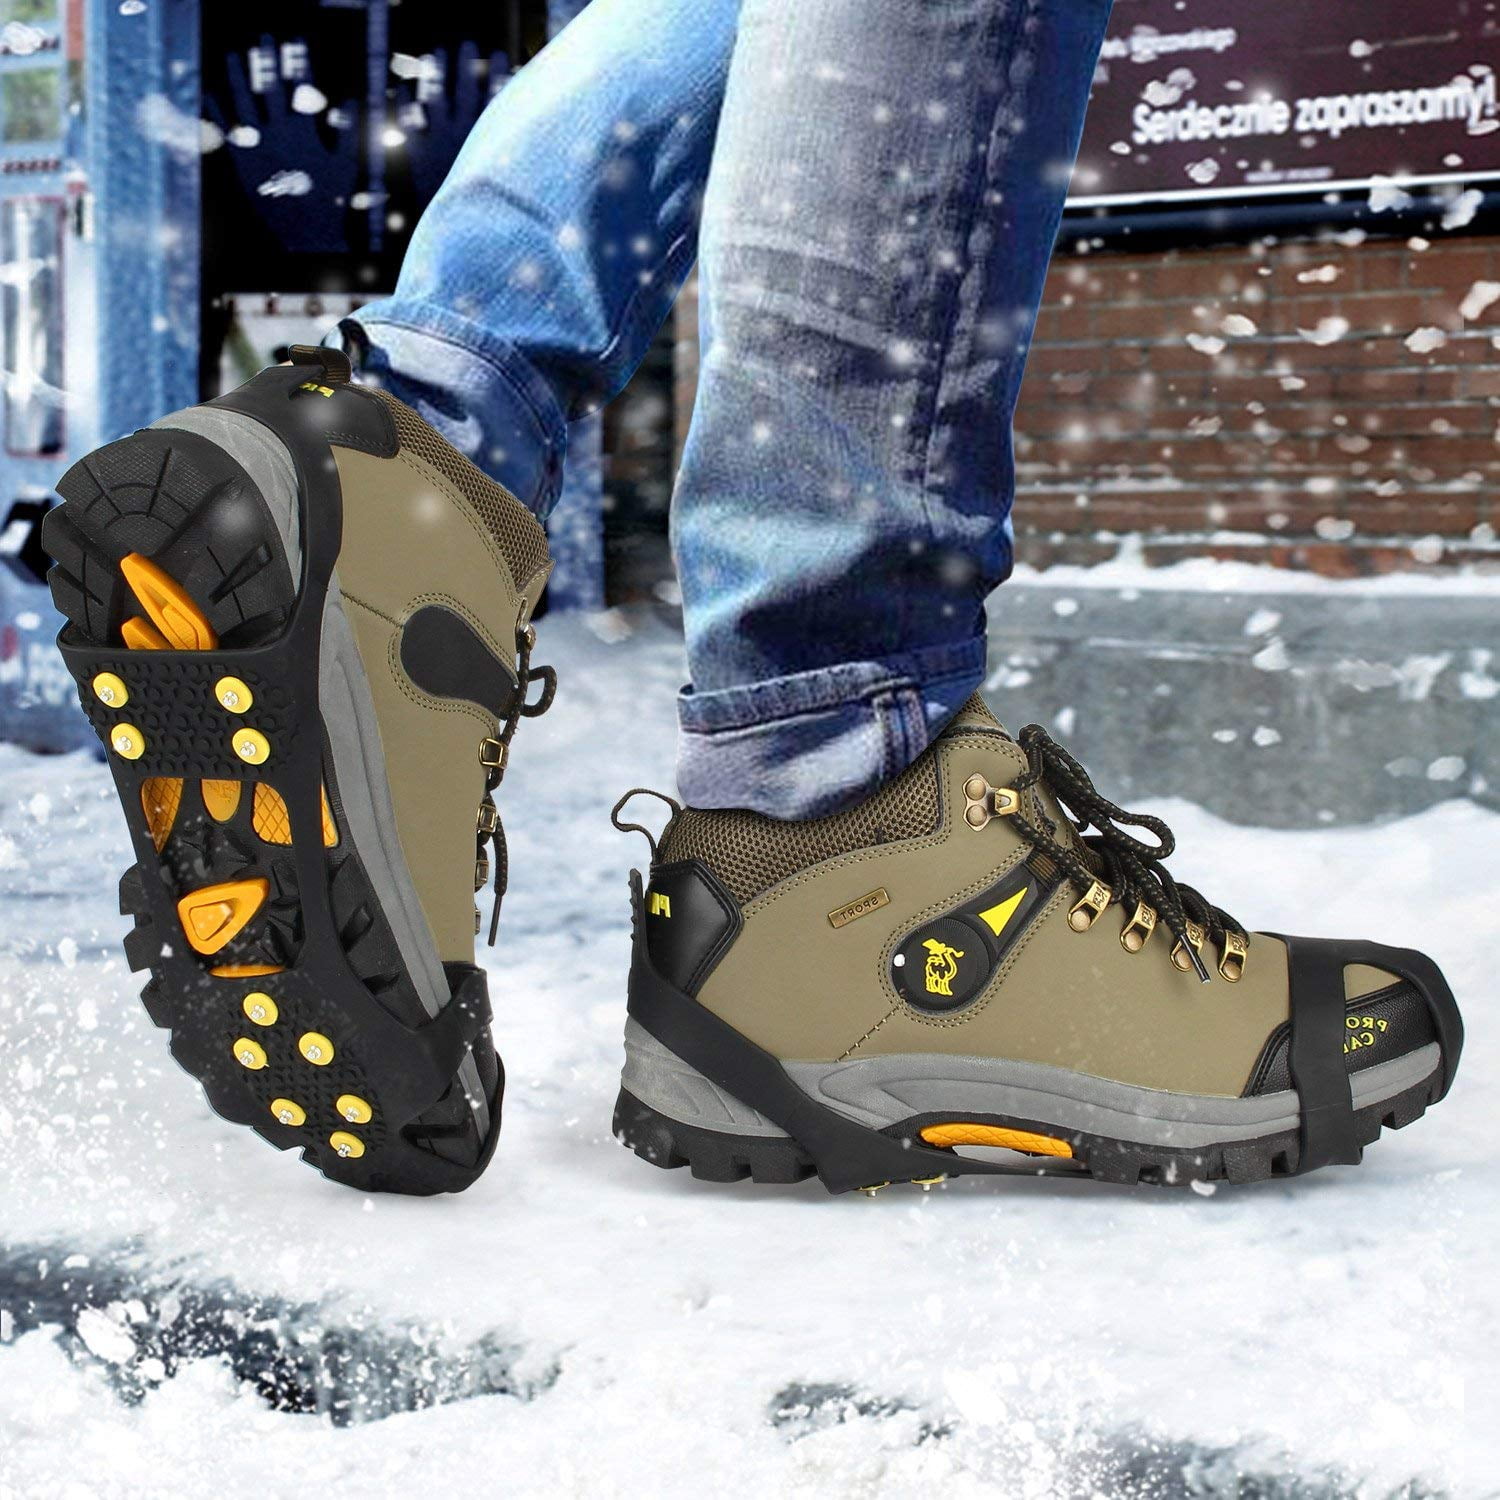 Snow Anti Slip Ice Grippers For Boots Shoes Grips Spikes Crampons Cleats S M L 